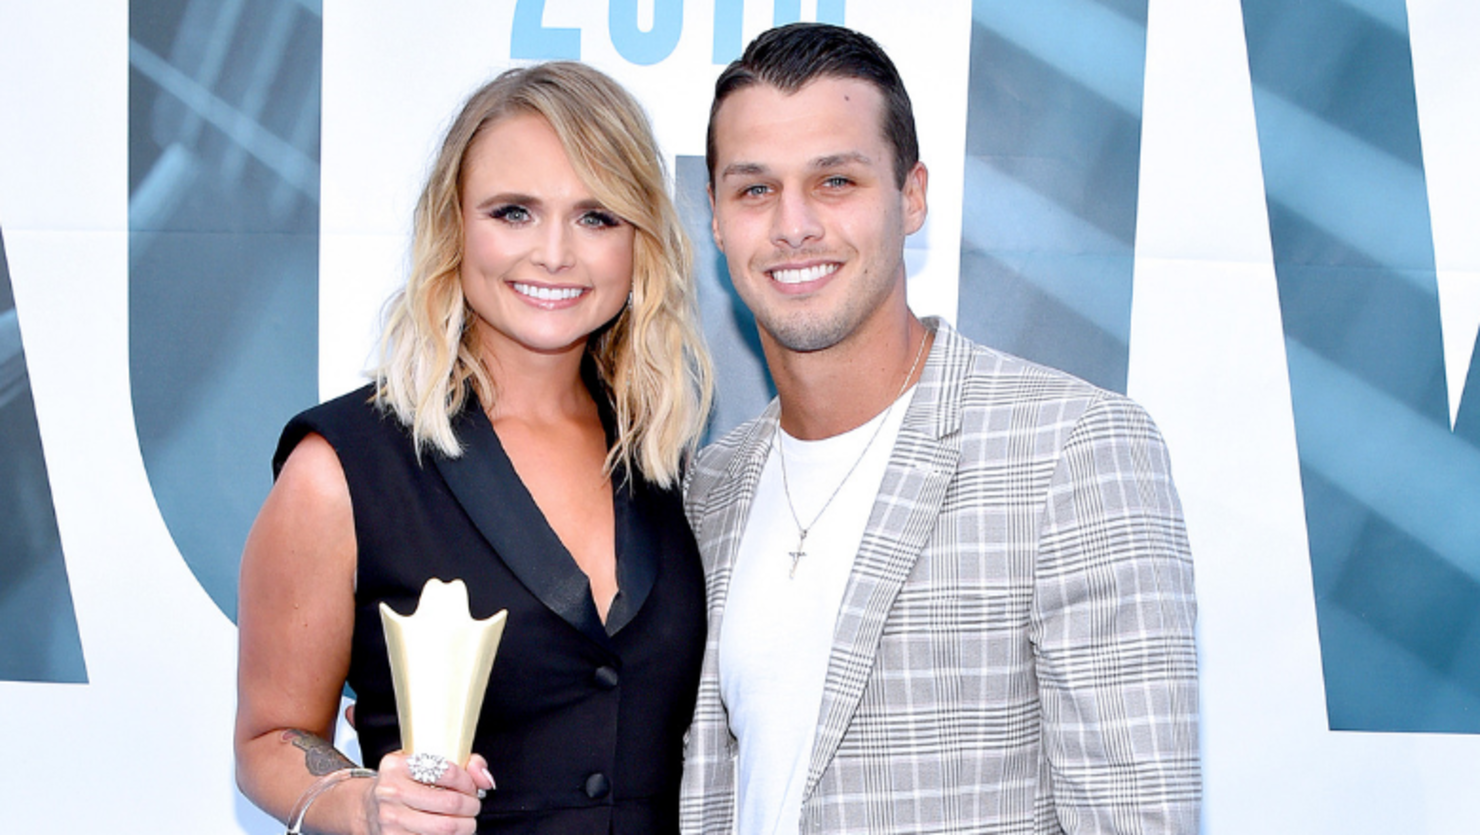 Miranda Lambert Gives Sweet Shout-Out To Her Husband On Stage